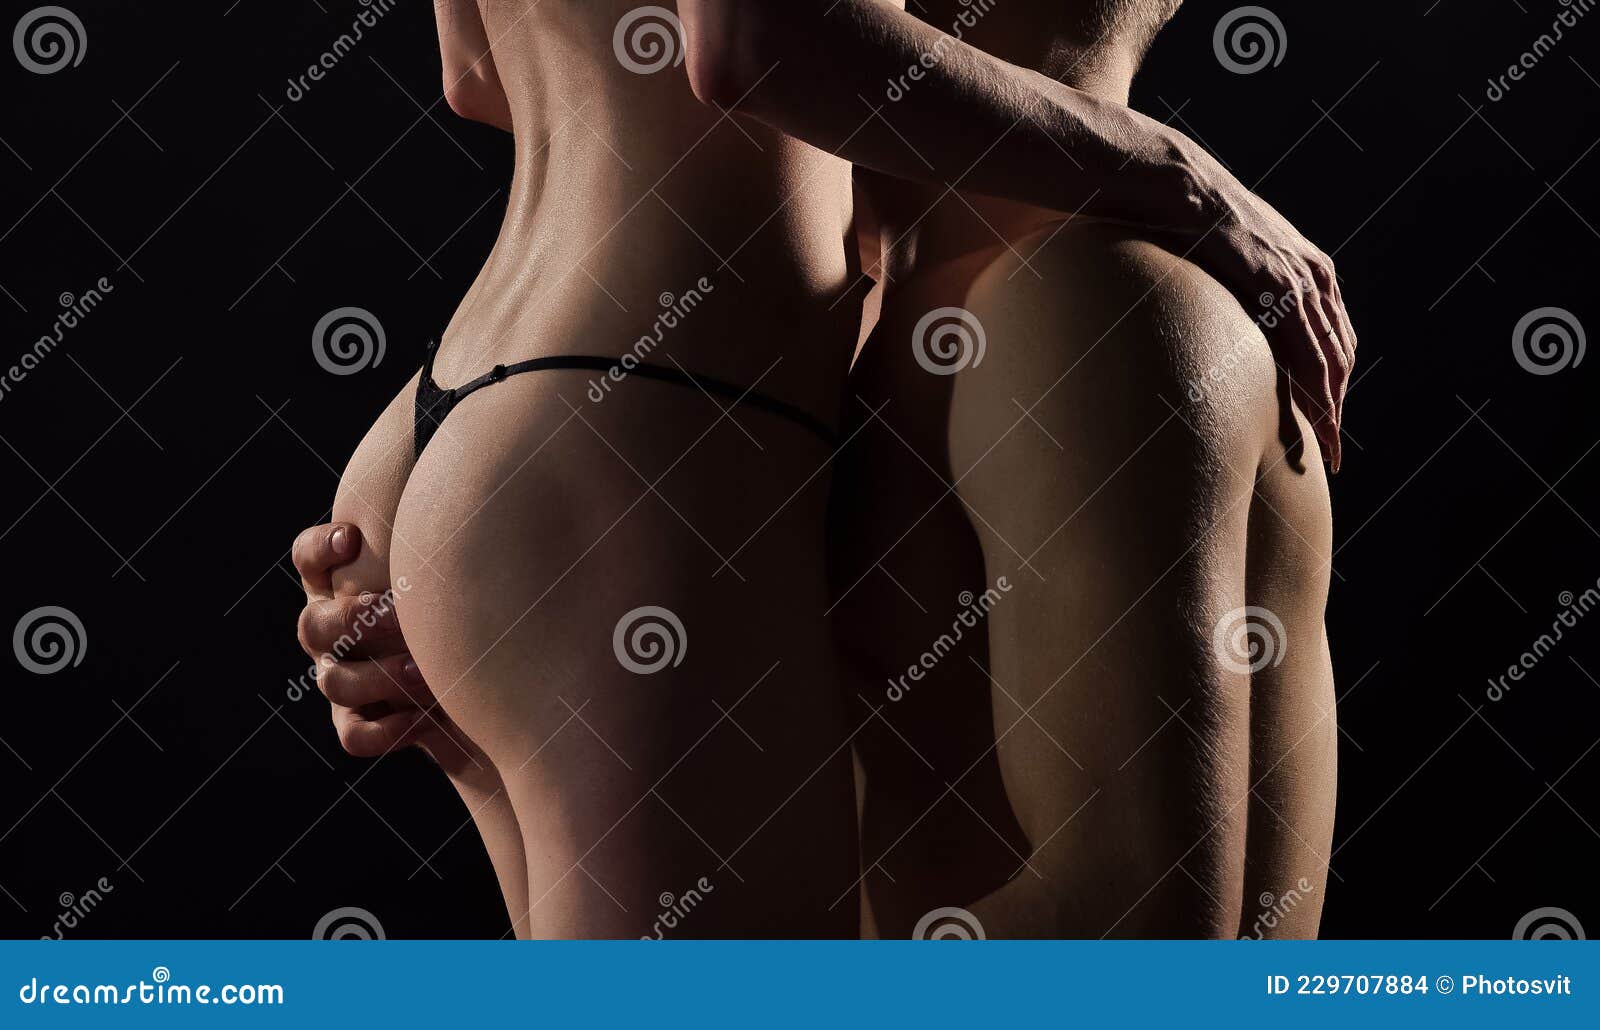 Nude Man And Woman Having Sexual Intercourse